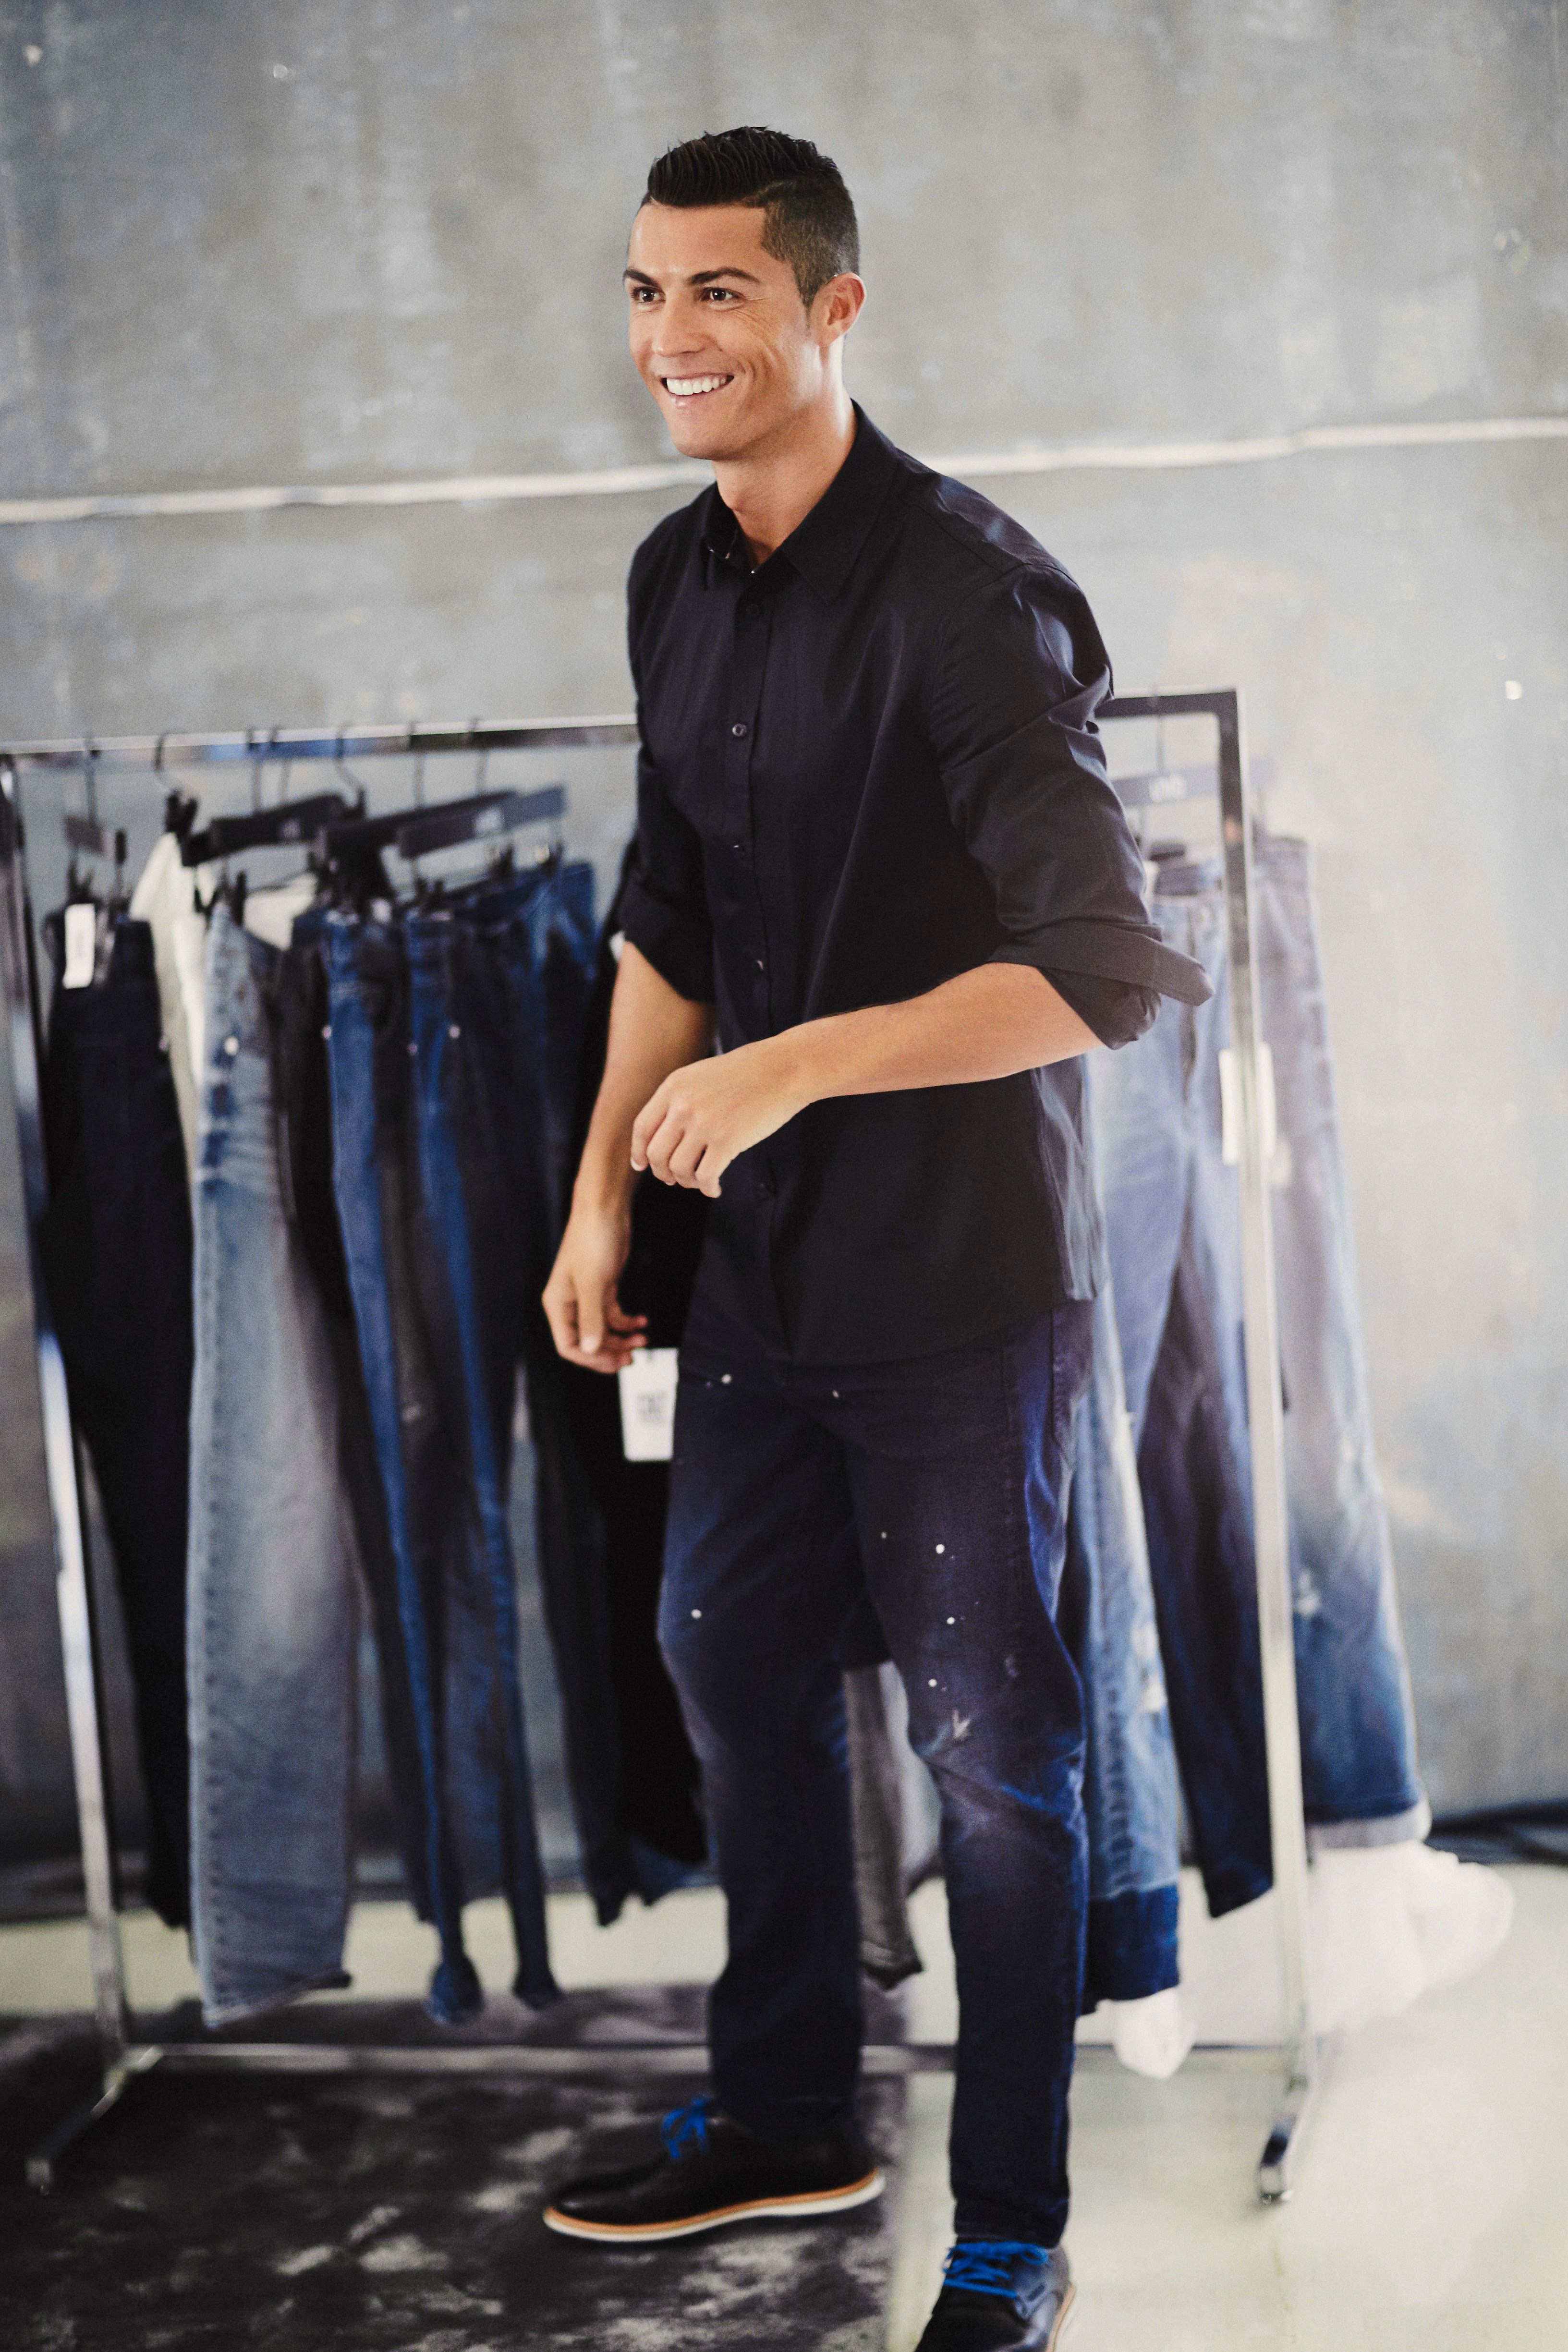 Torrent genopfyldning Gedehams Interview With Cristiano Ronaldo About New CR7 Denim Line